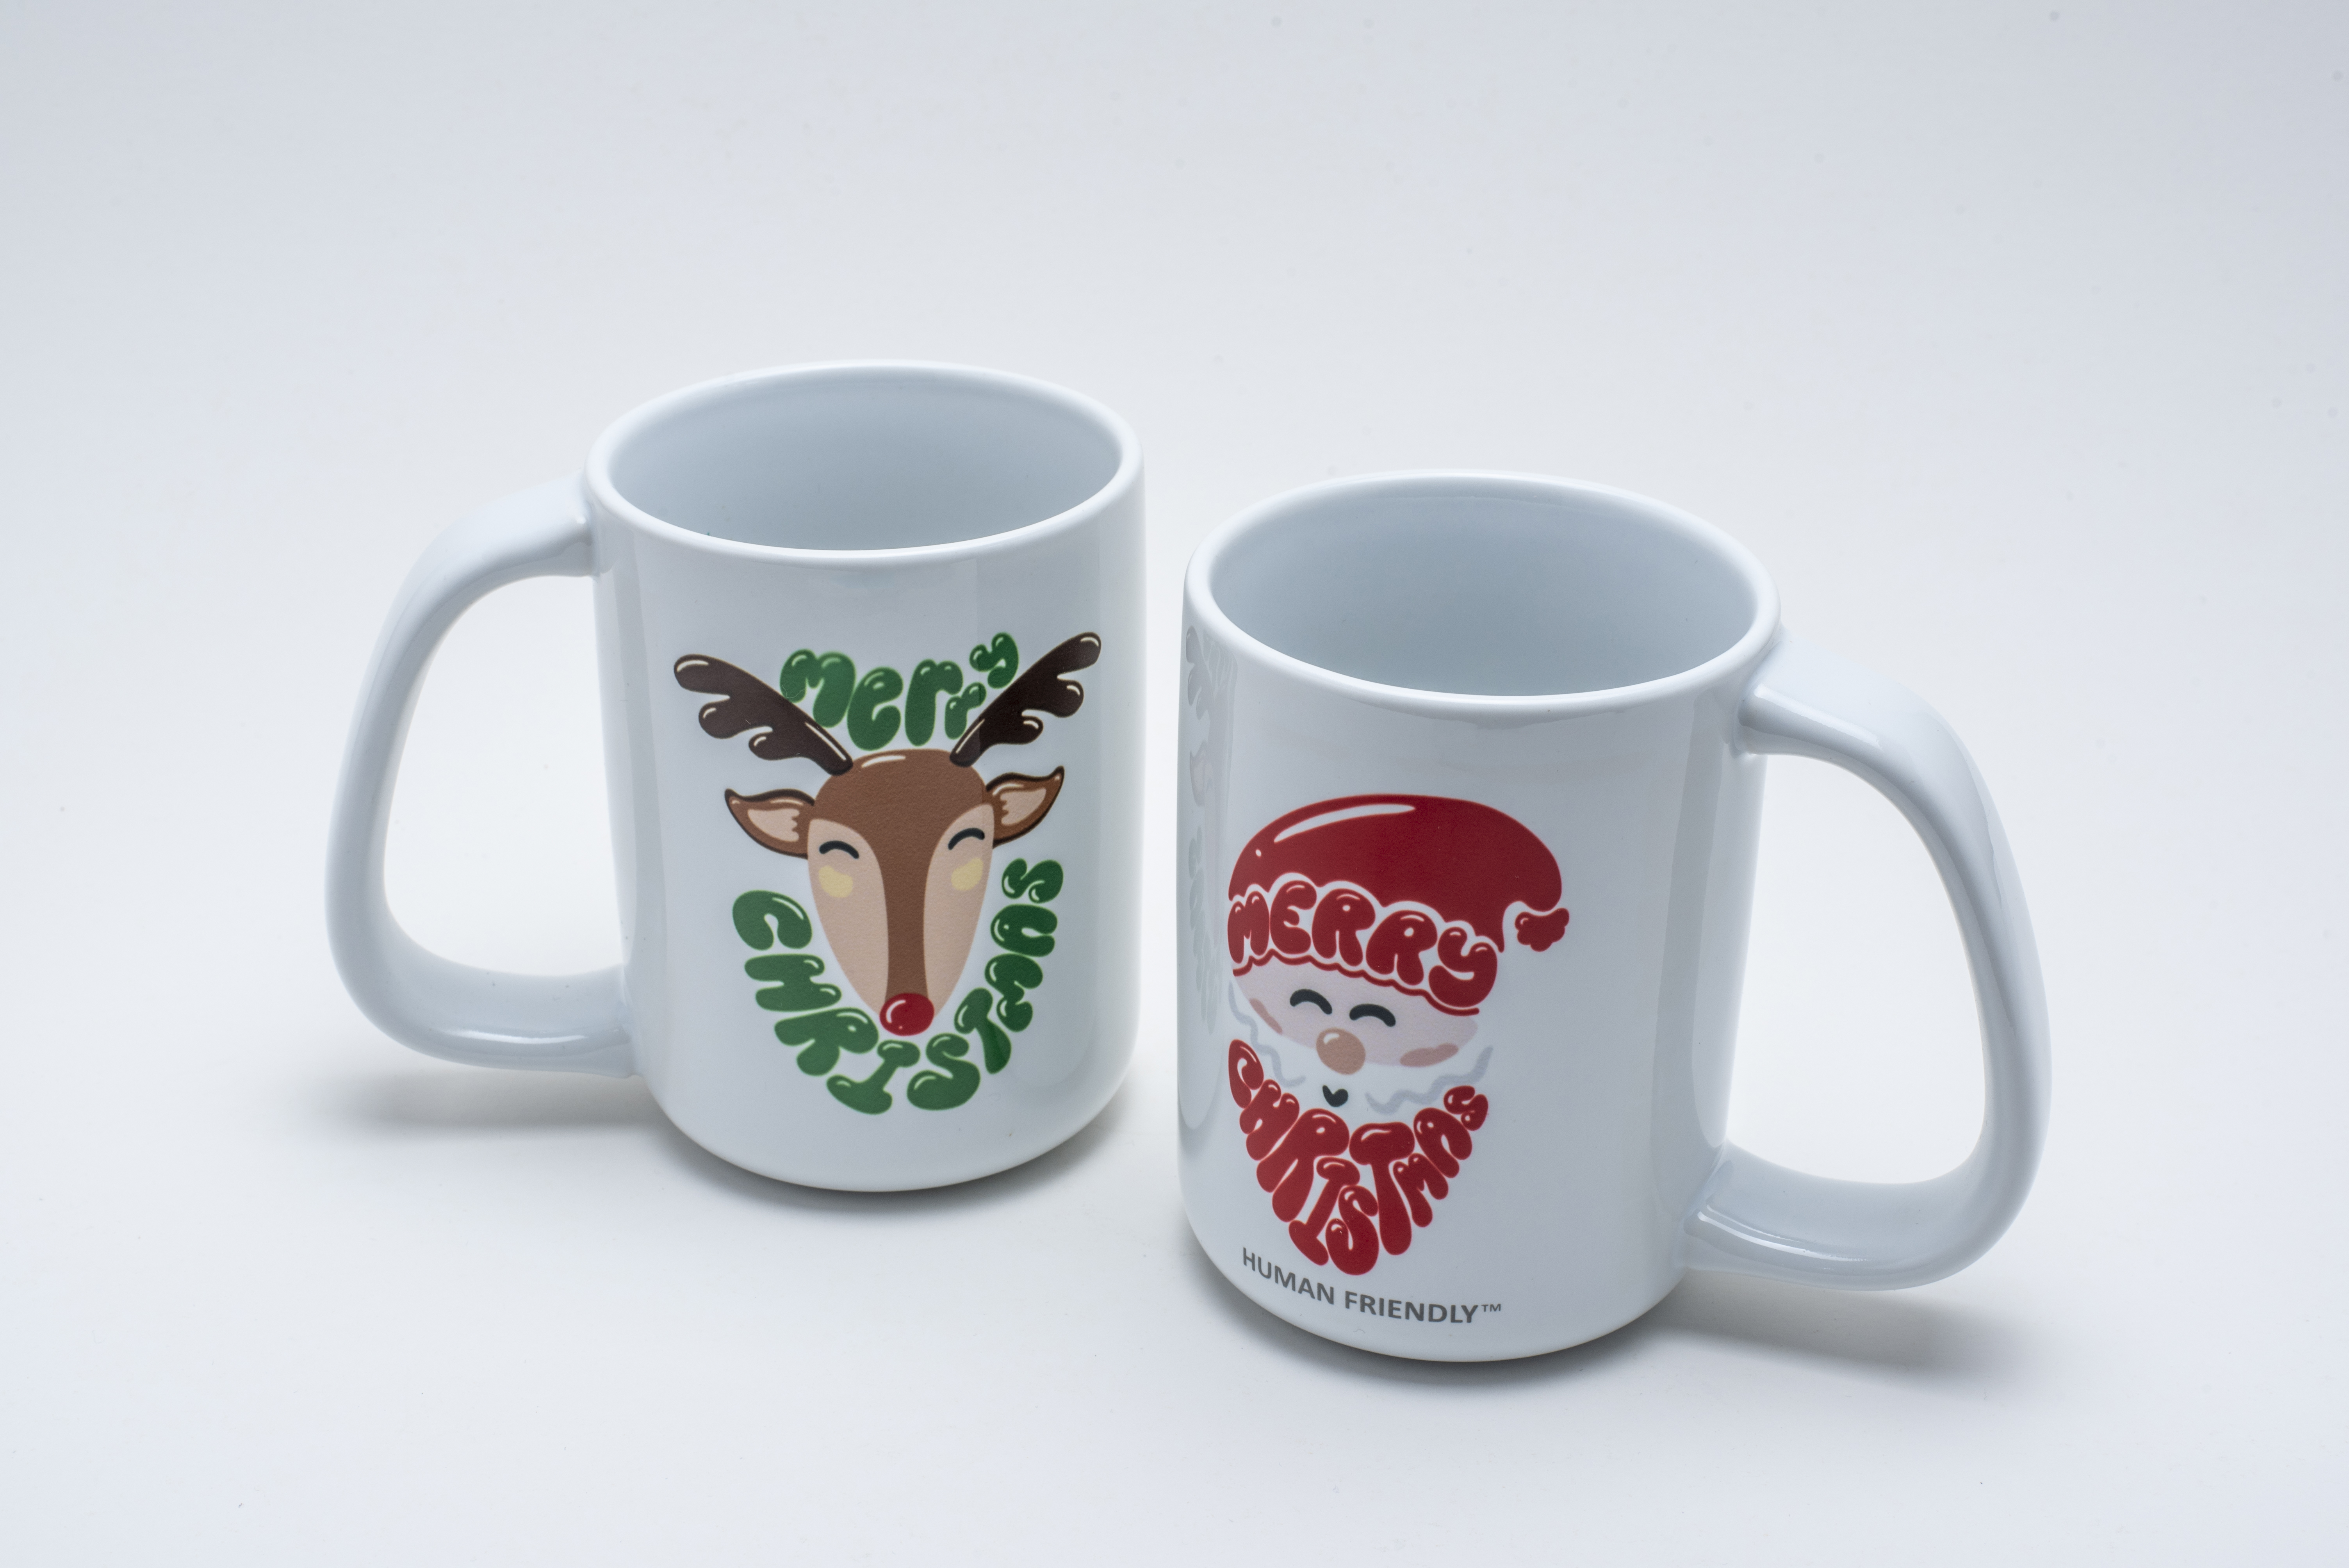 CURVD Touts Its Ergonomic Mug As The Perfect Human-Friendly Promotional Gift Item For Companies